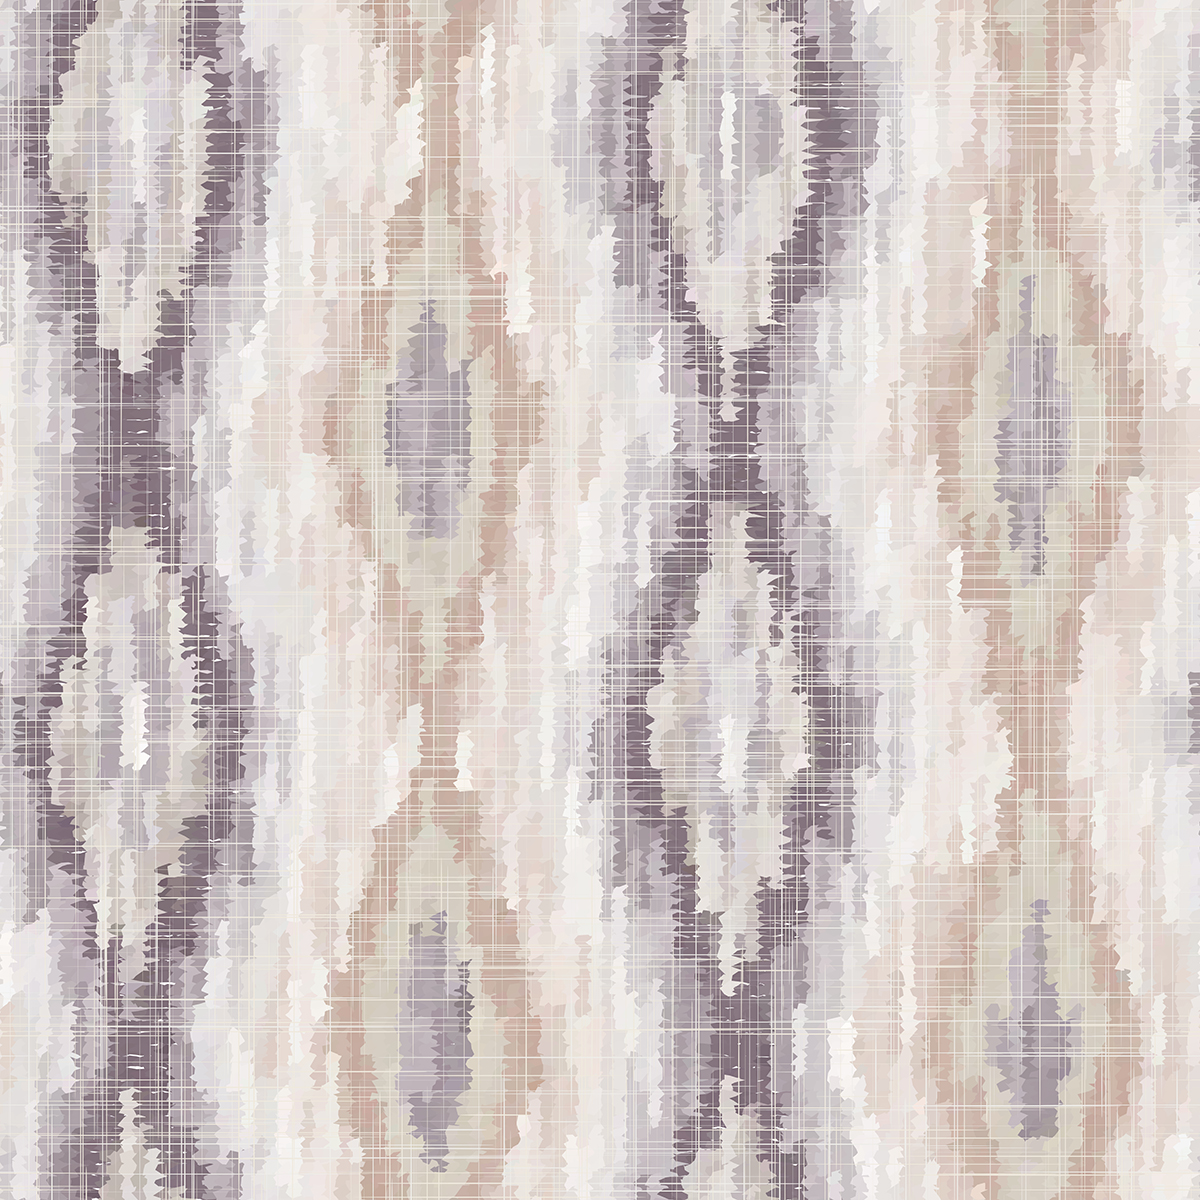 A fabric with a pattern